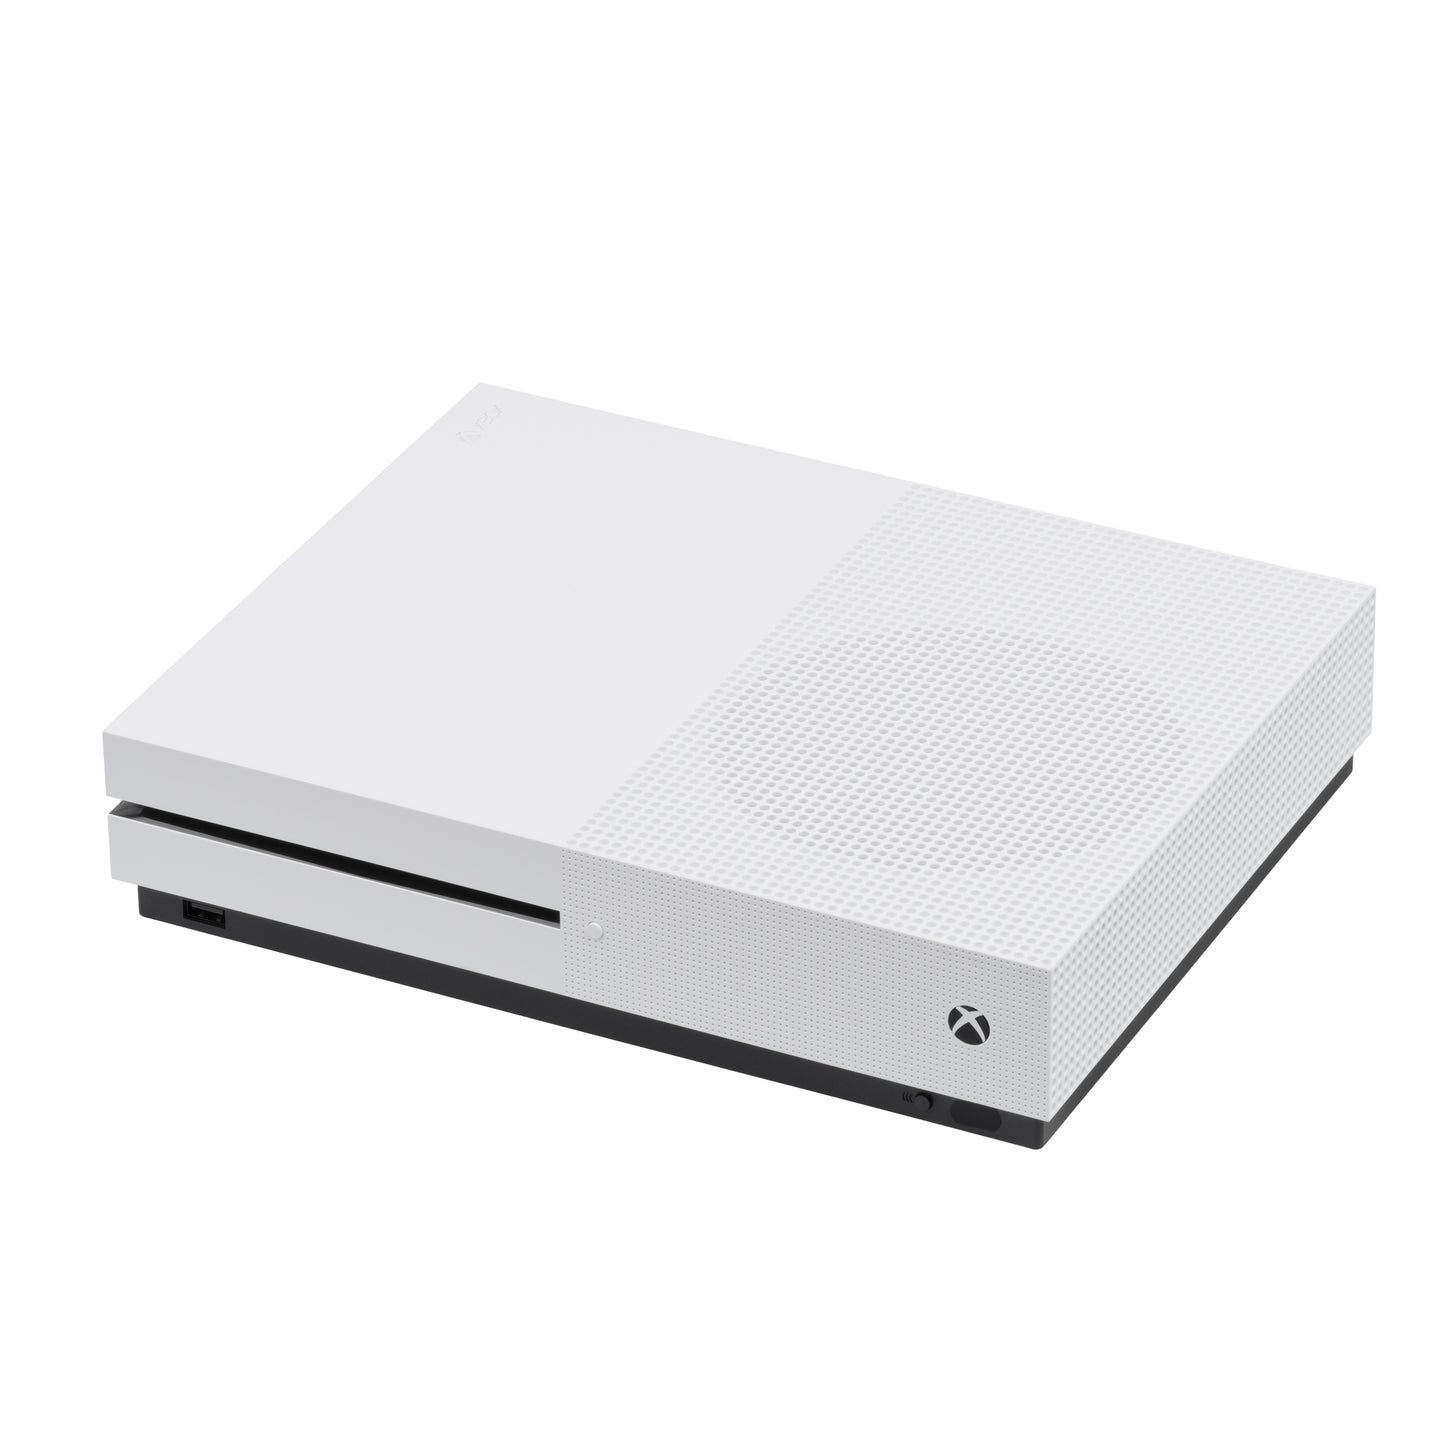 Xbox One S 500GB White Console No Controller Unboxed Preowned